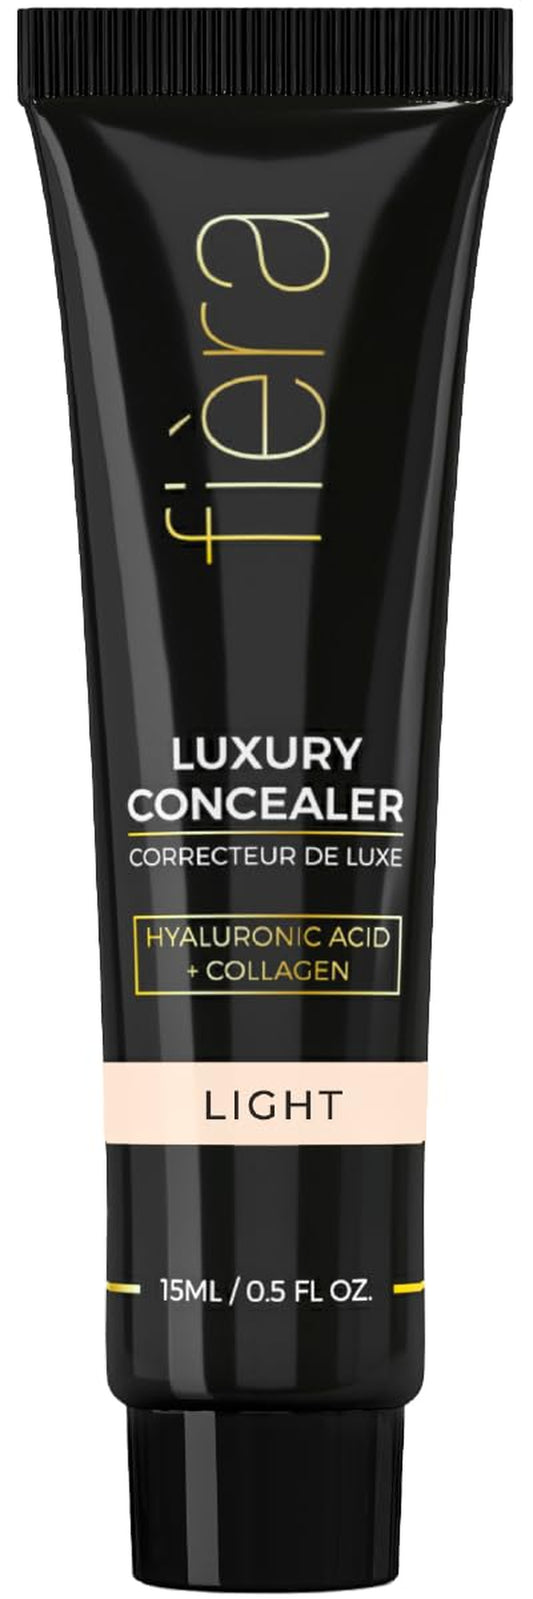 Luxury Concealer with Anti-Aging - All Day Coverage for Dark Circles, Fine Lines, Wrinkles & Spots - Light, 0.5 Ounce